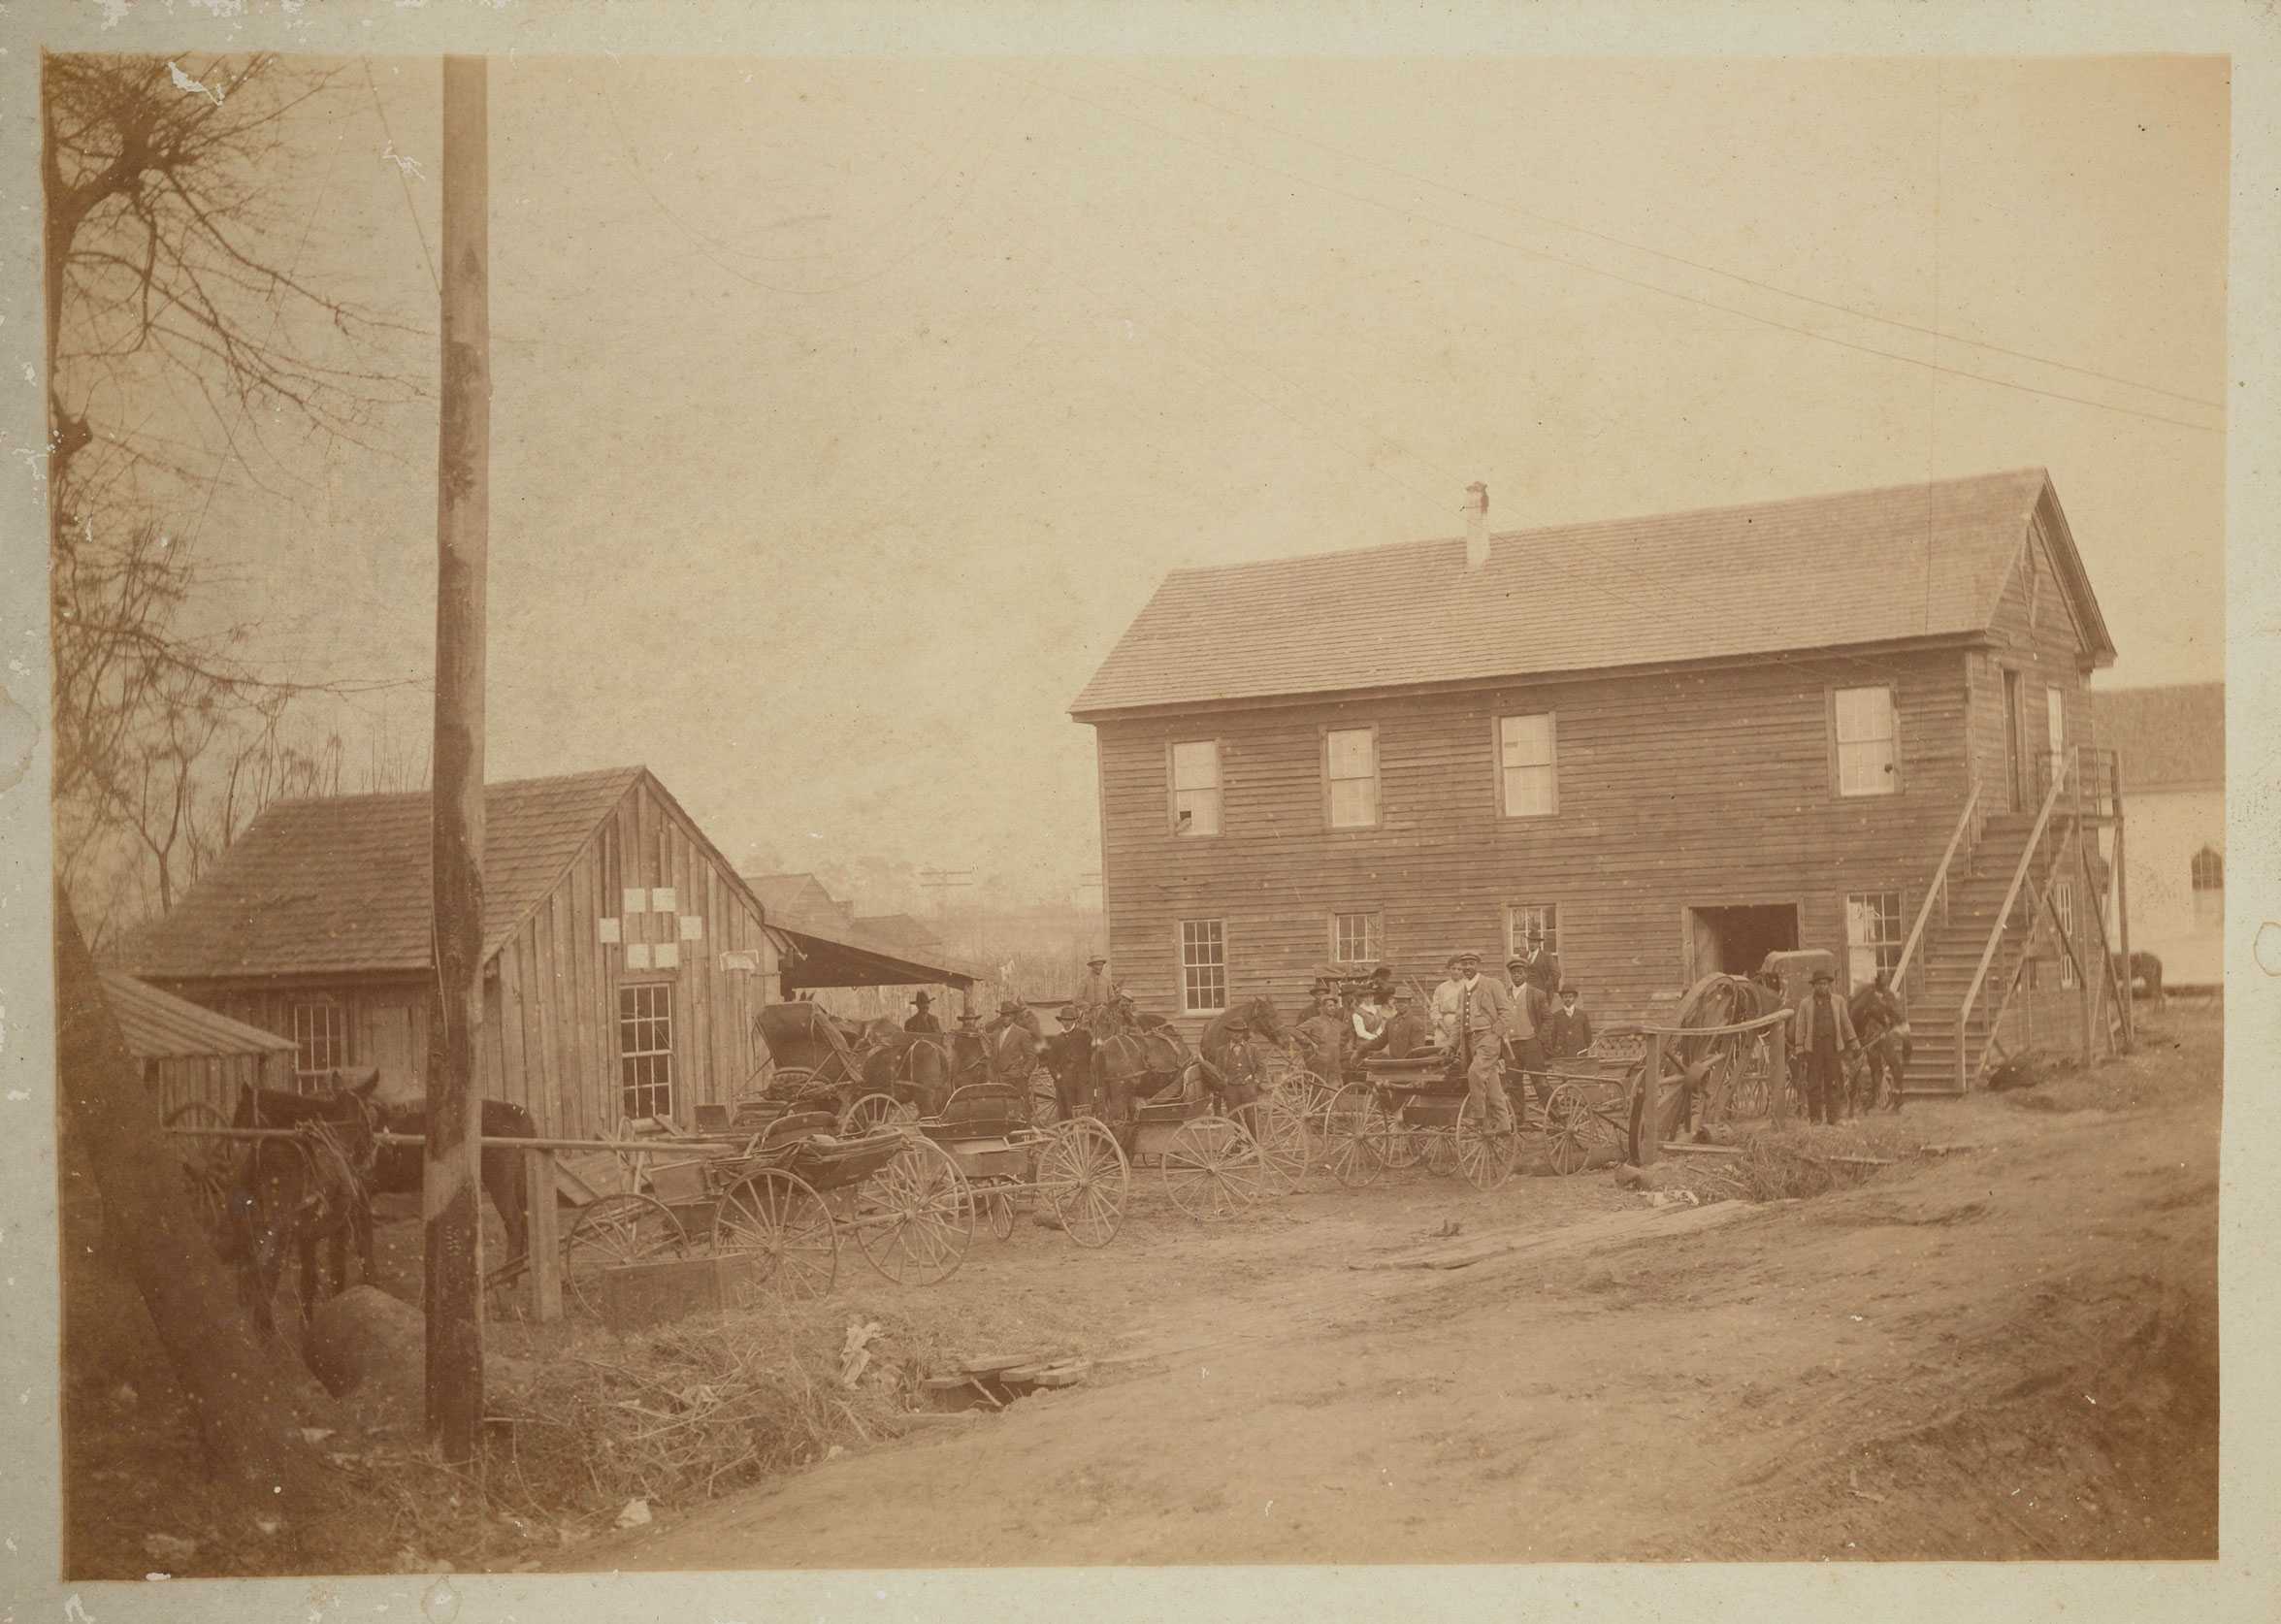 A worn sepia toned photograph of the horses and carriages outside of the blacksmith shop.